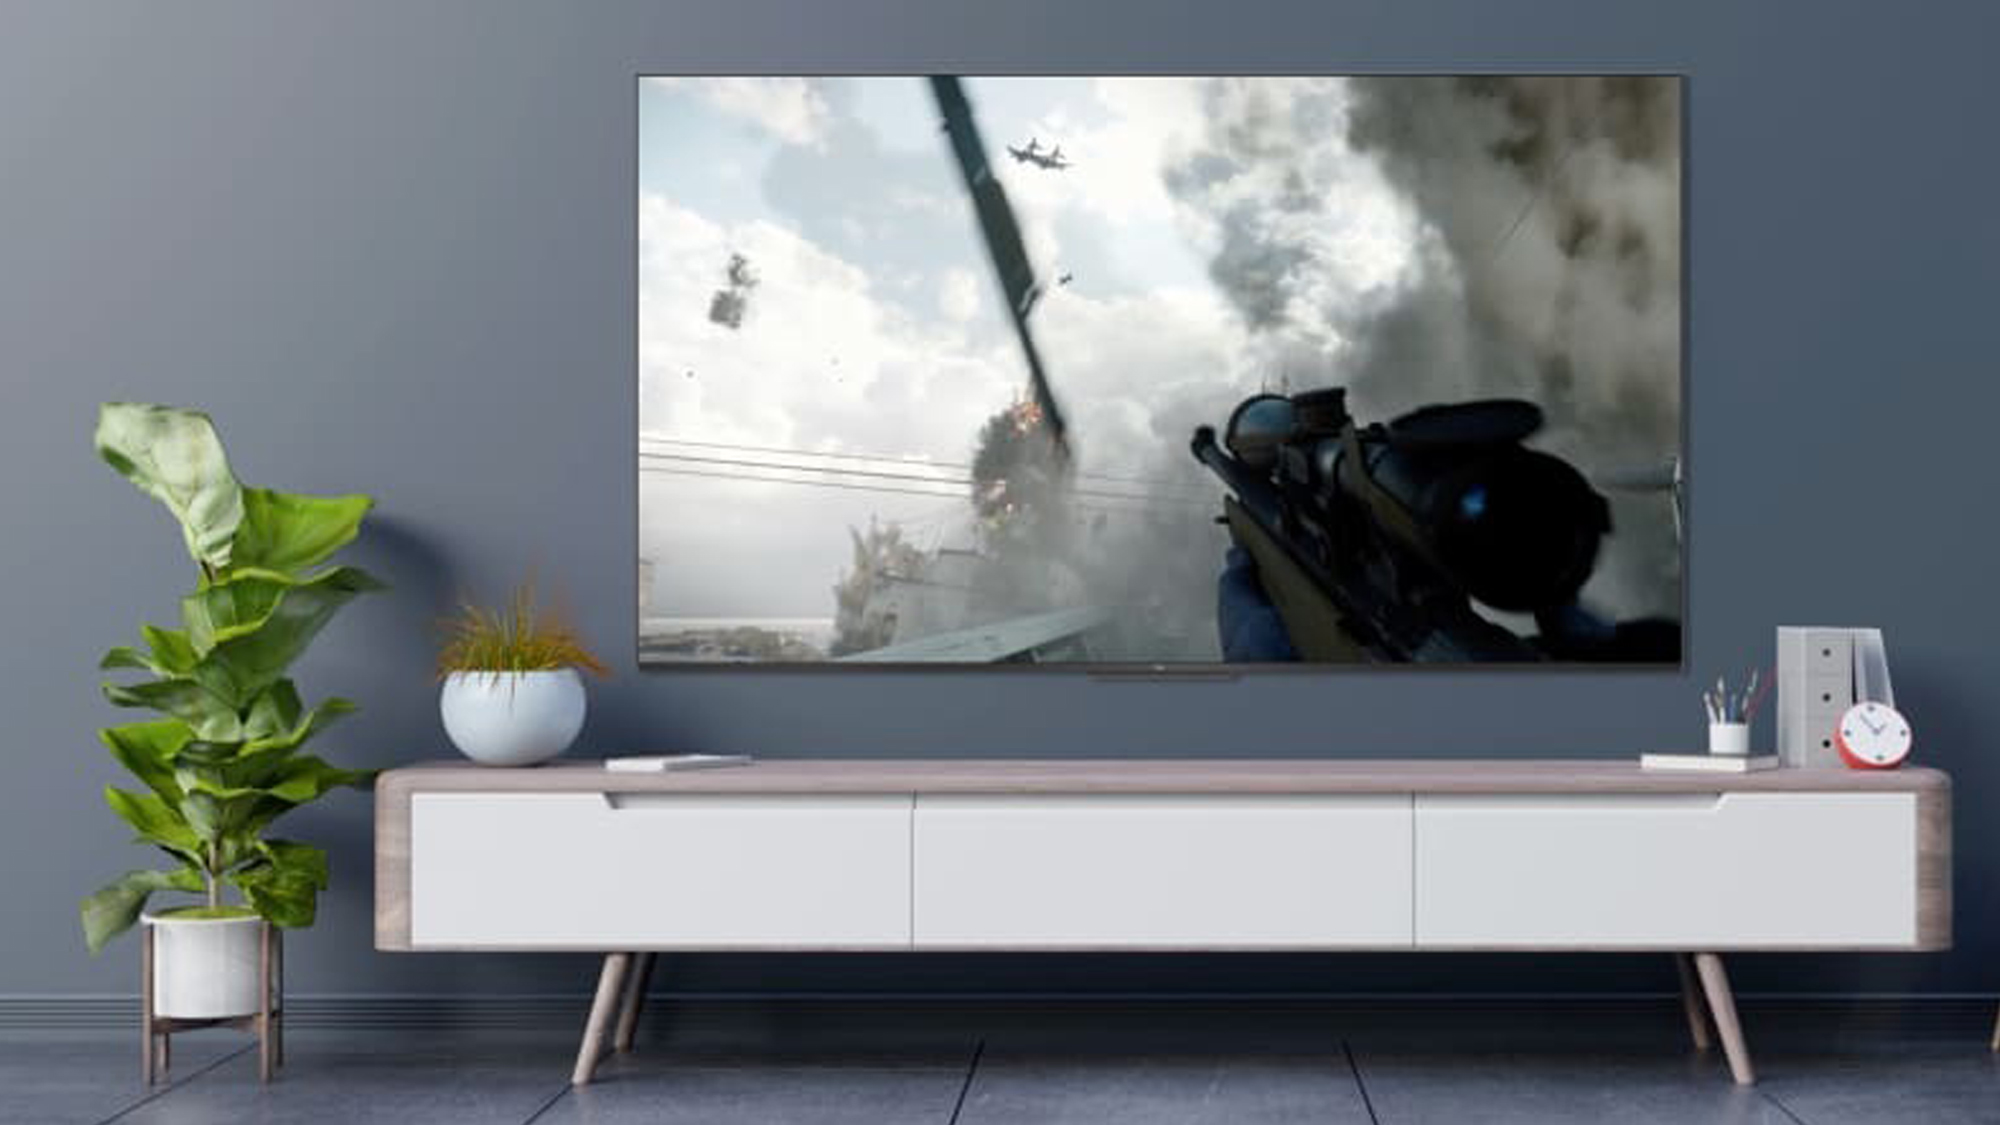 Looking for a new TV? These 8 deals will suit every budget